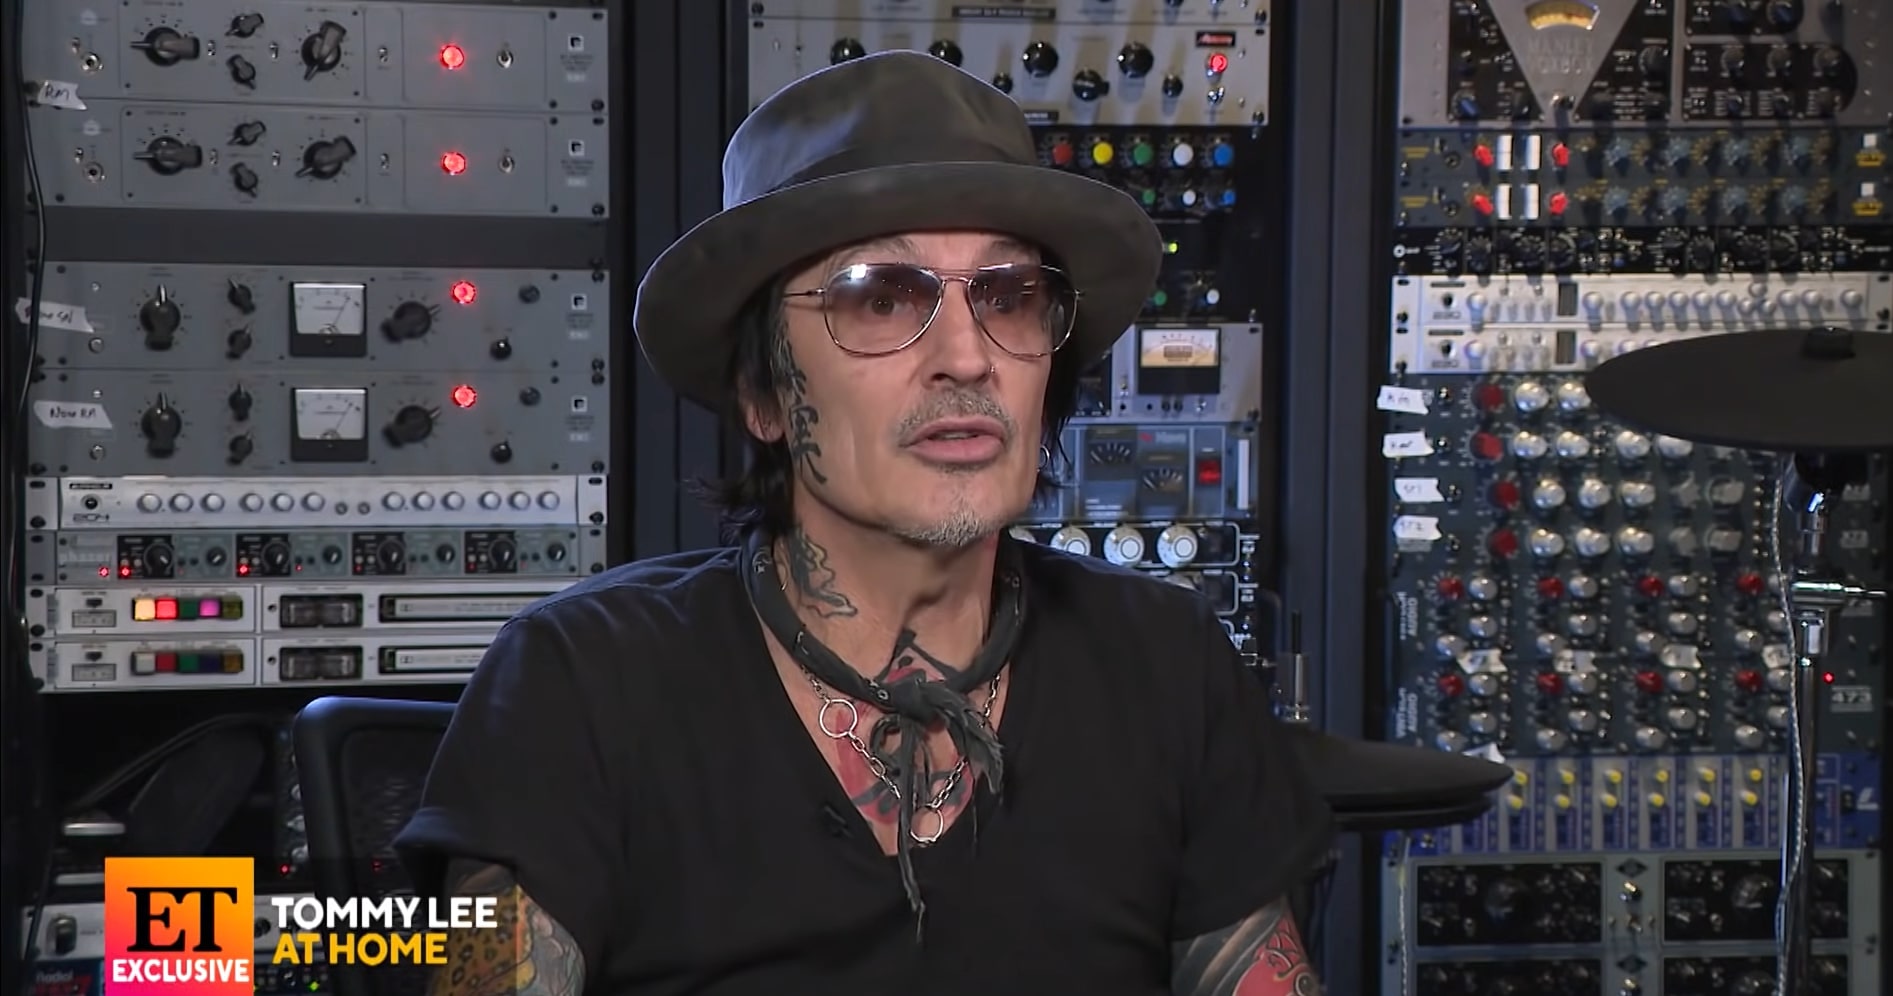 What is Tommy Lee's Net Worth?